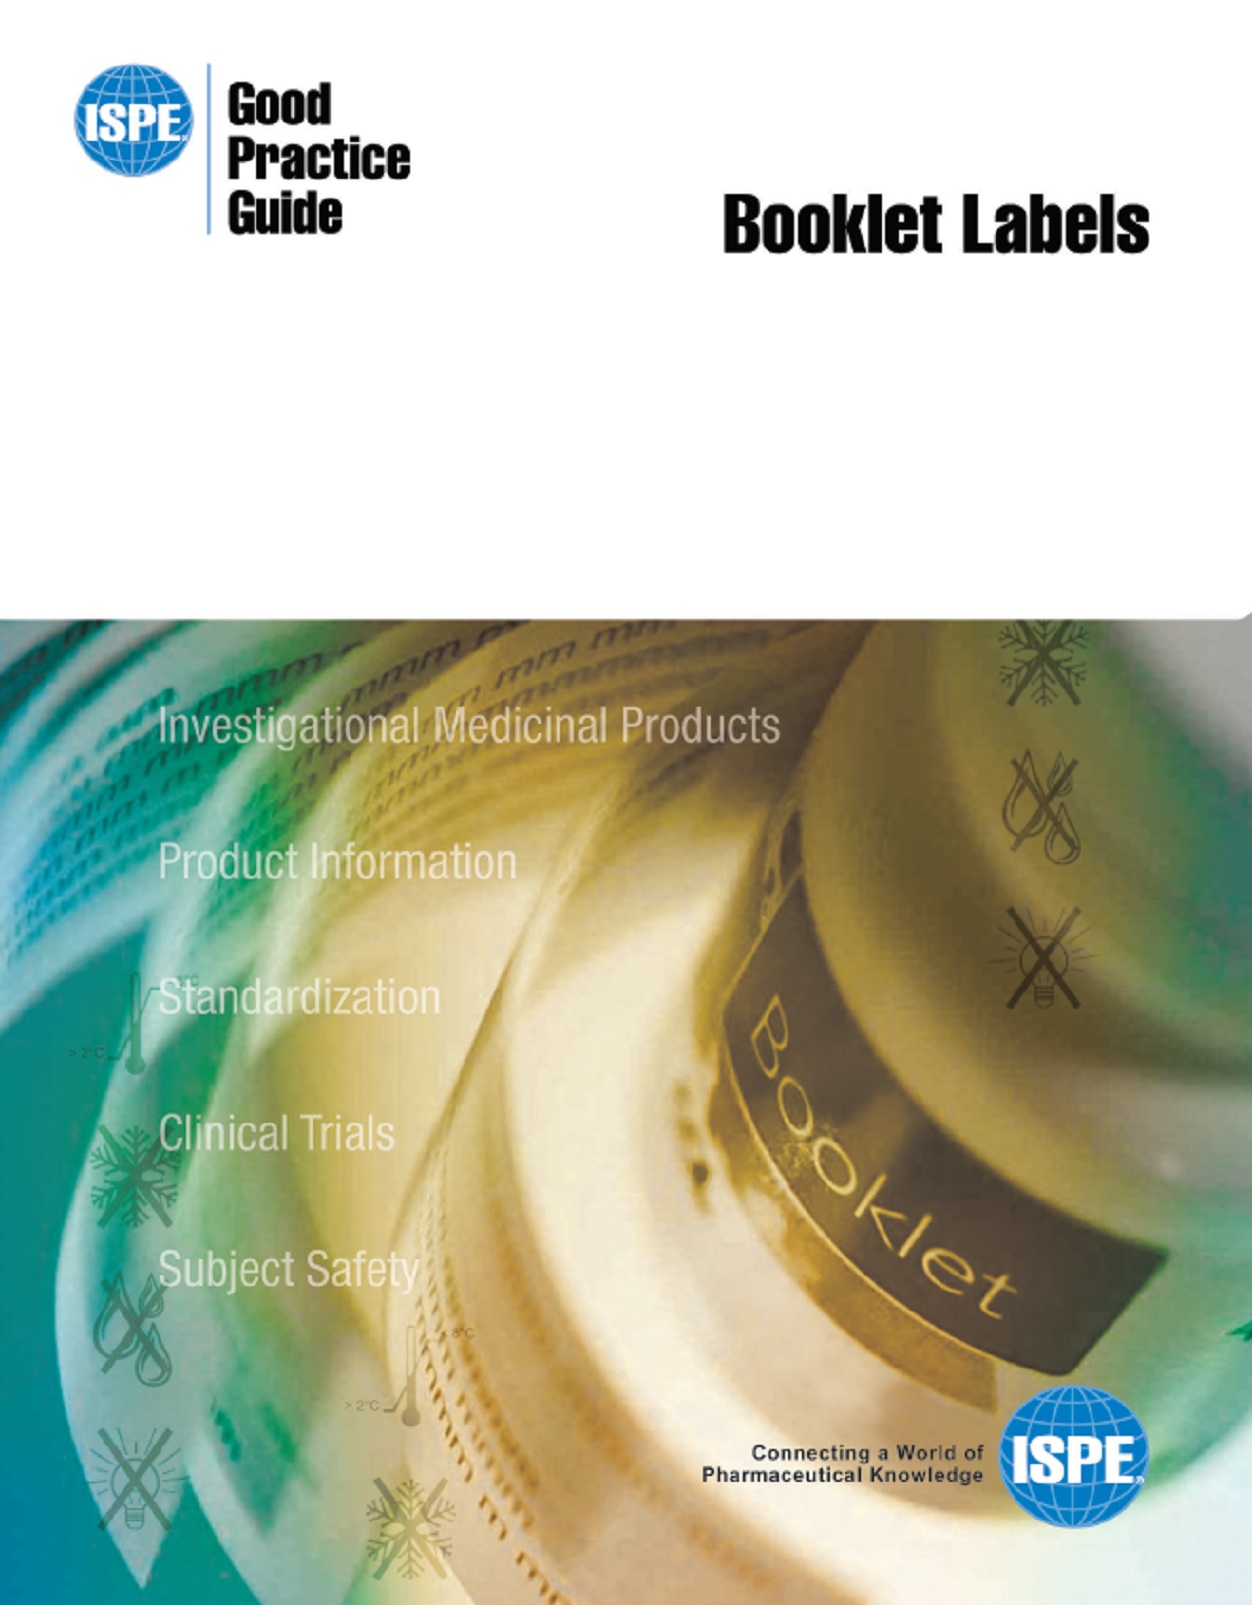 ISPE Good Practice Guide: Booklet Labels